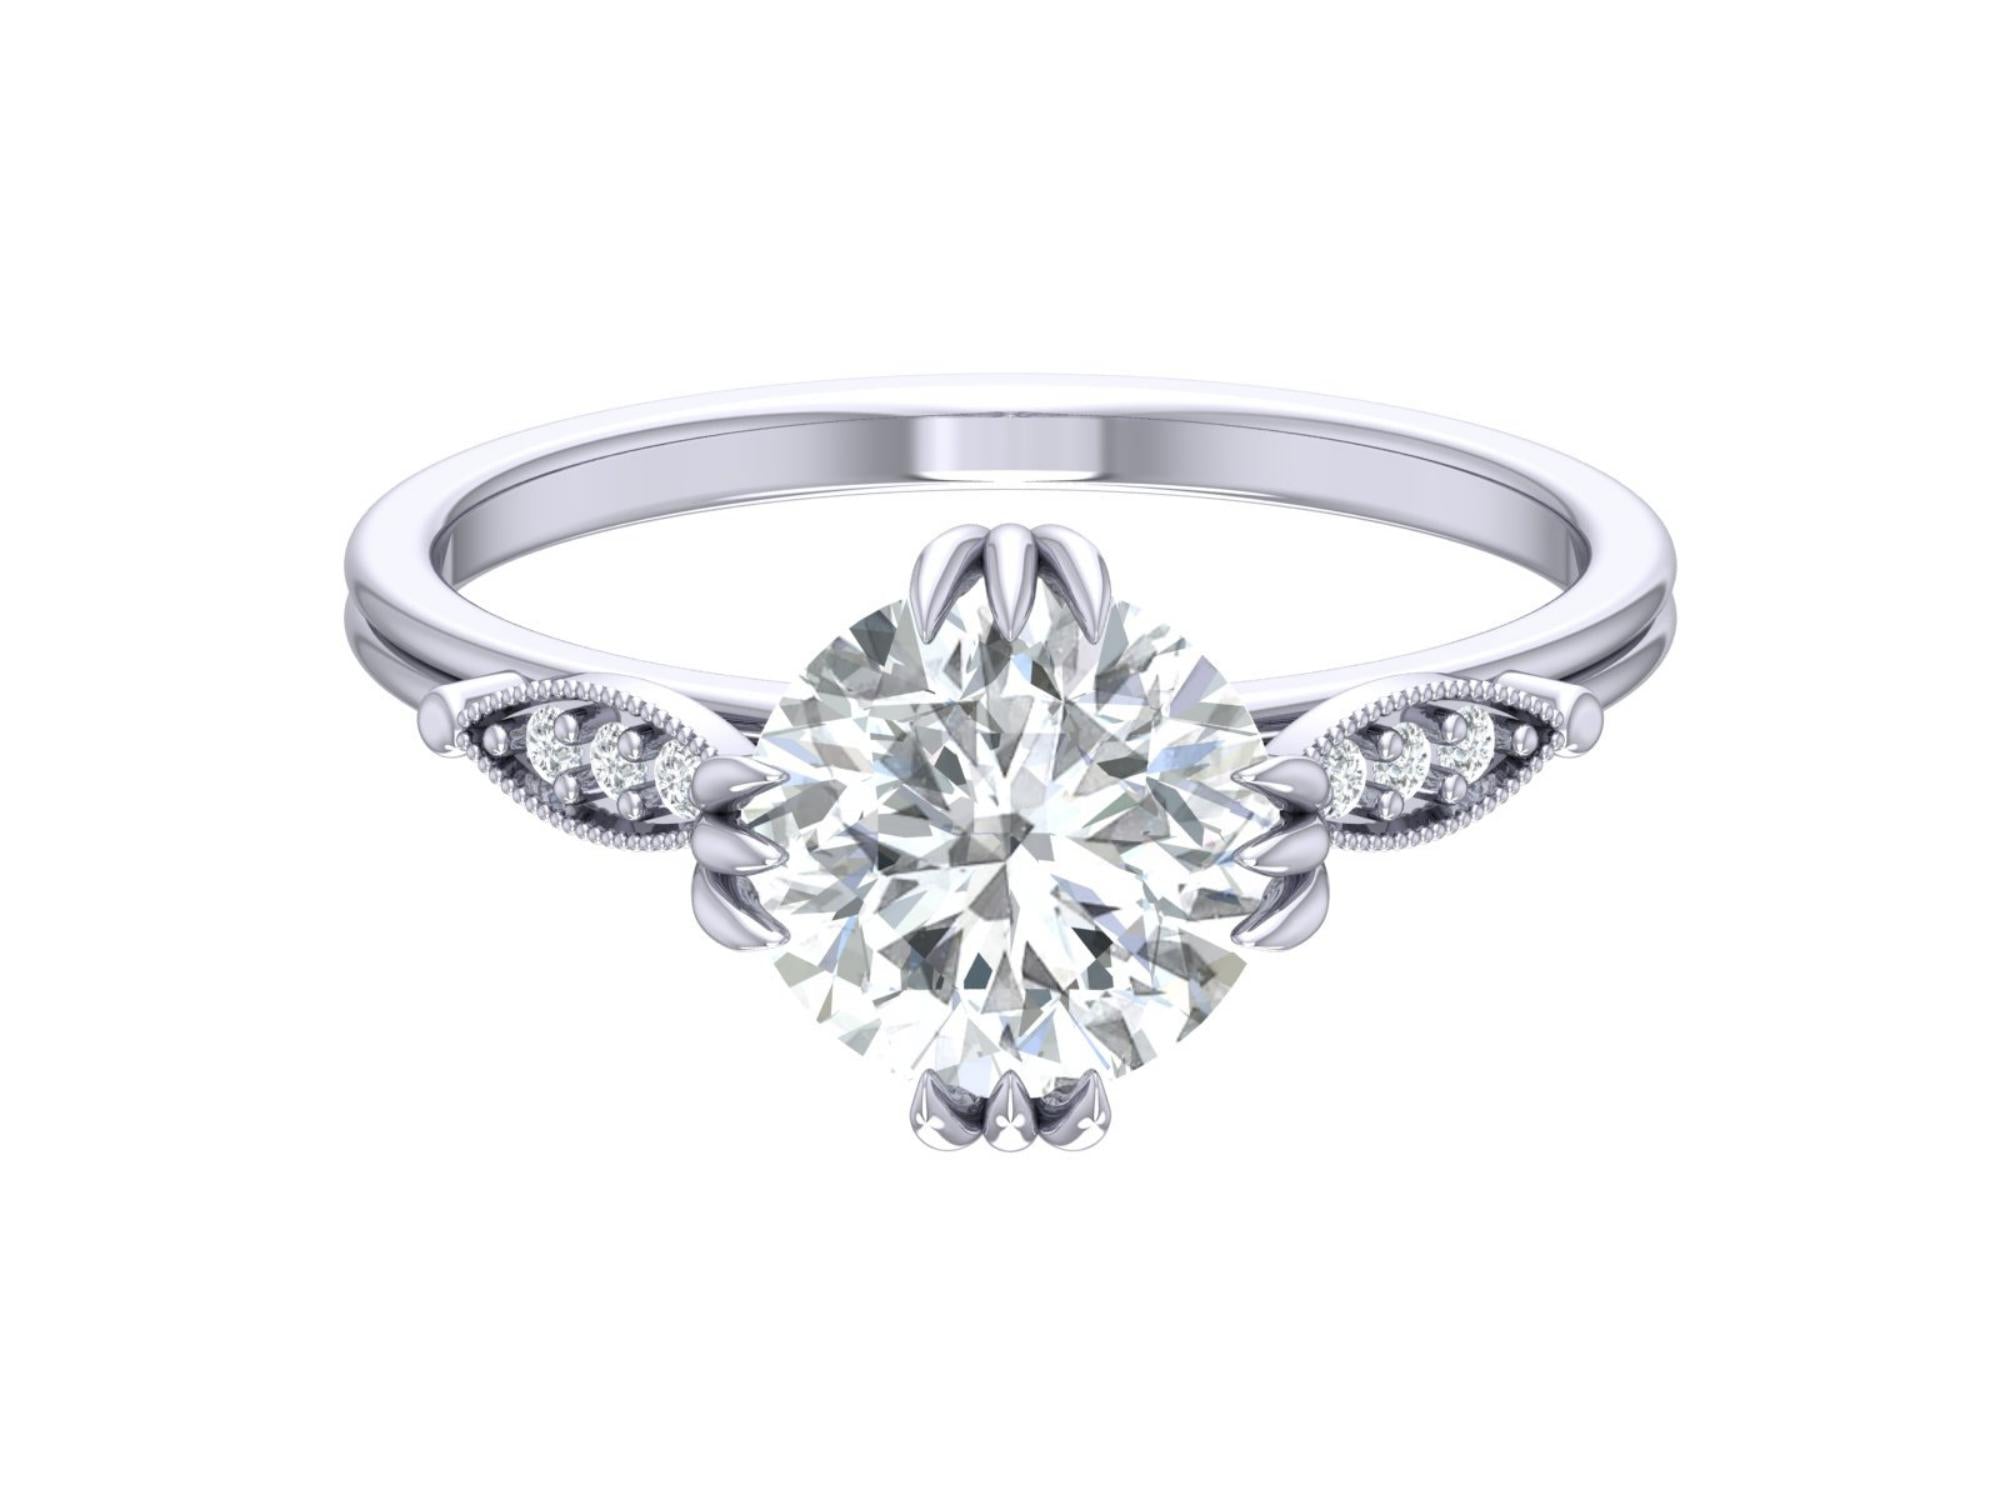 2.5CT Old Mine Round Moissanite Engagement Ring, Old Euro Cut.